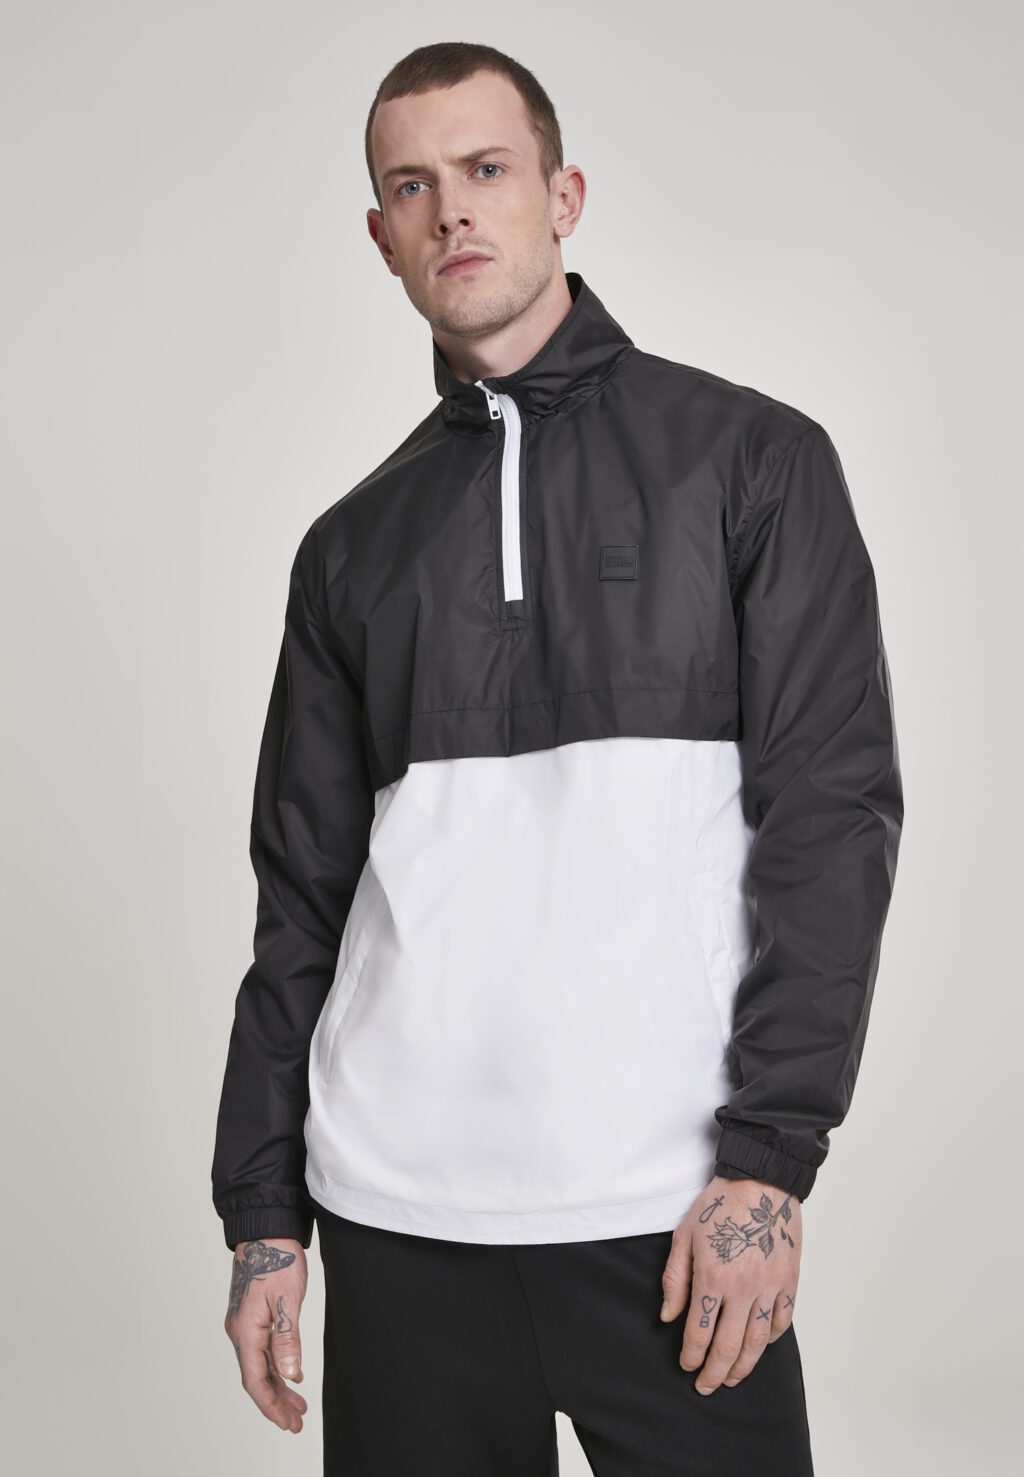 Urban Classics Stand Up Collar Pull Over Jacket blk/wht TB2748